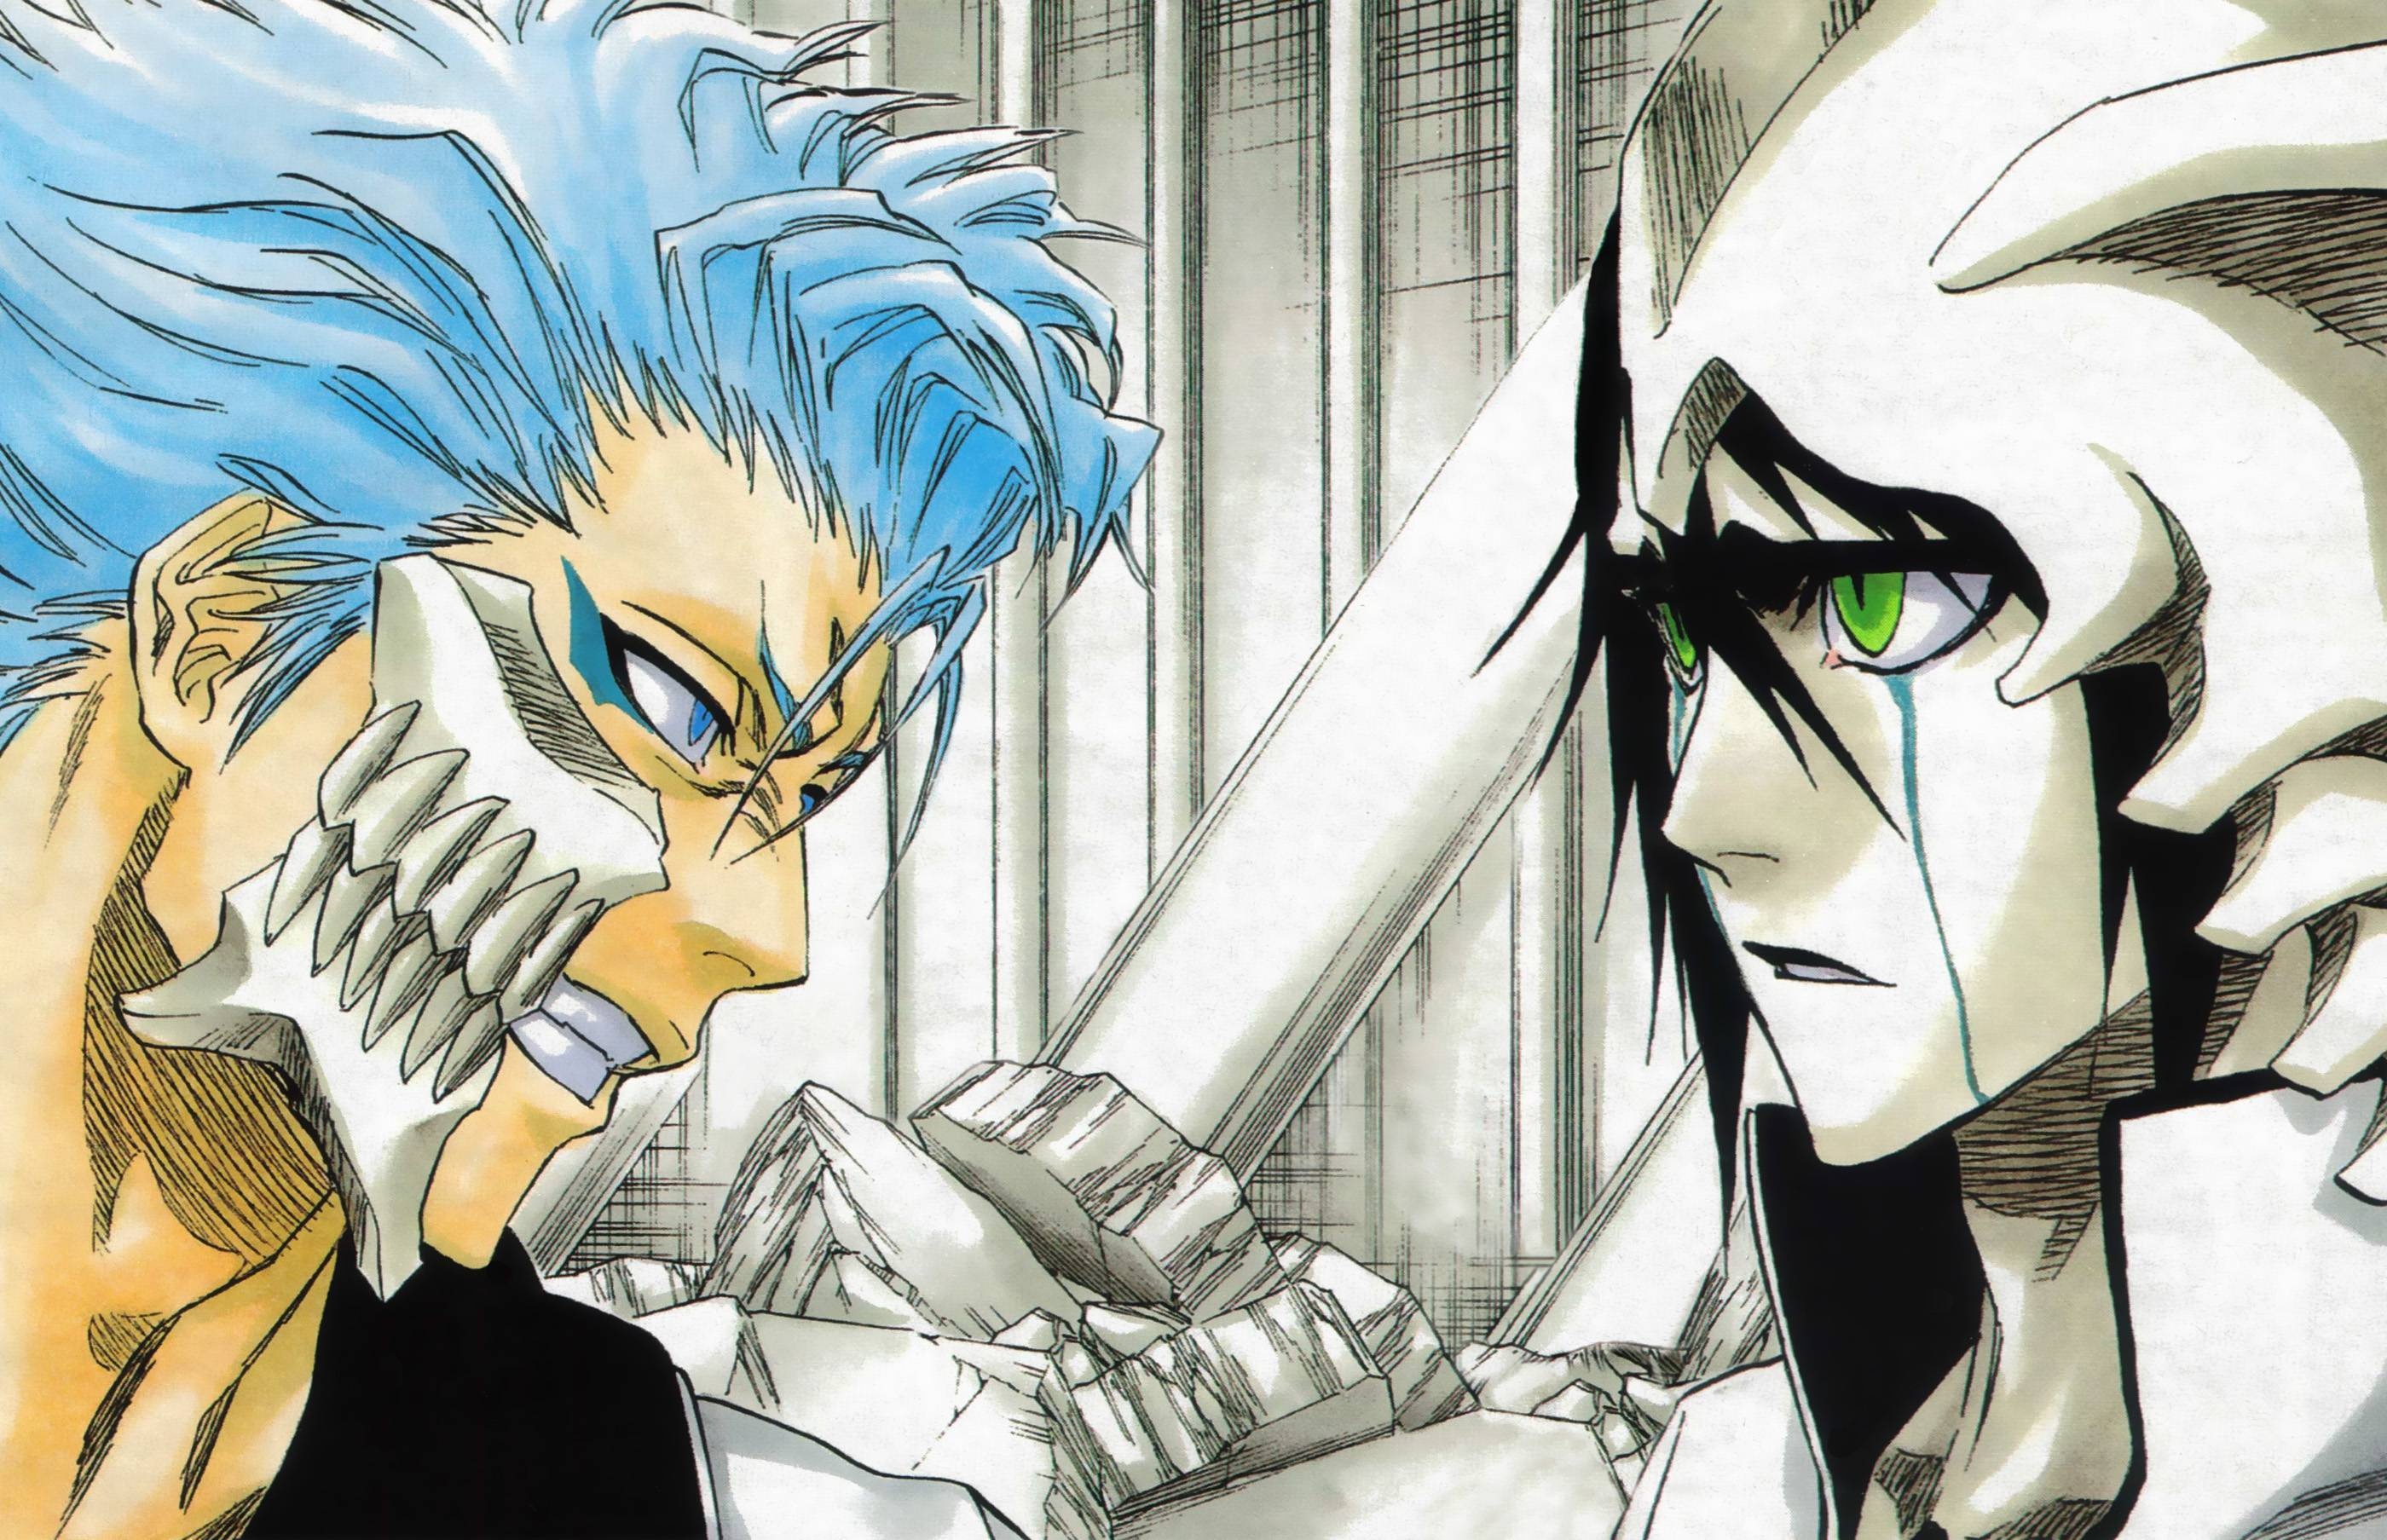 Grimmjow Jaggerjack: A highly skilled fighter, able to temporarily imprison the more powerful Ulquiorra in his Caja de Negacion. 2800x1810 HD Background.